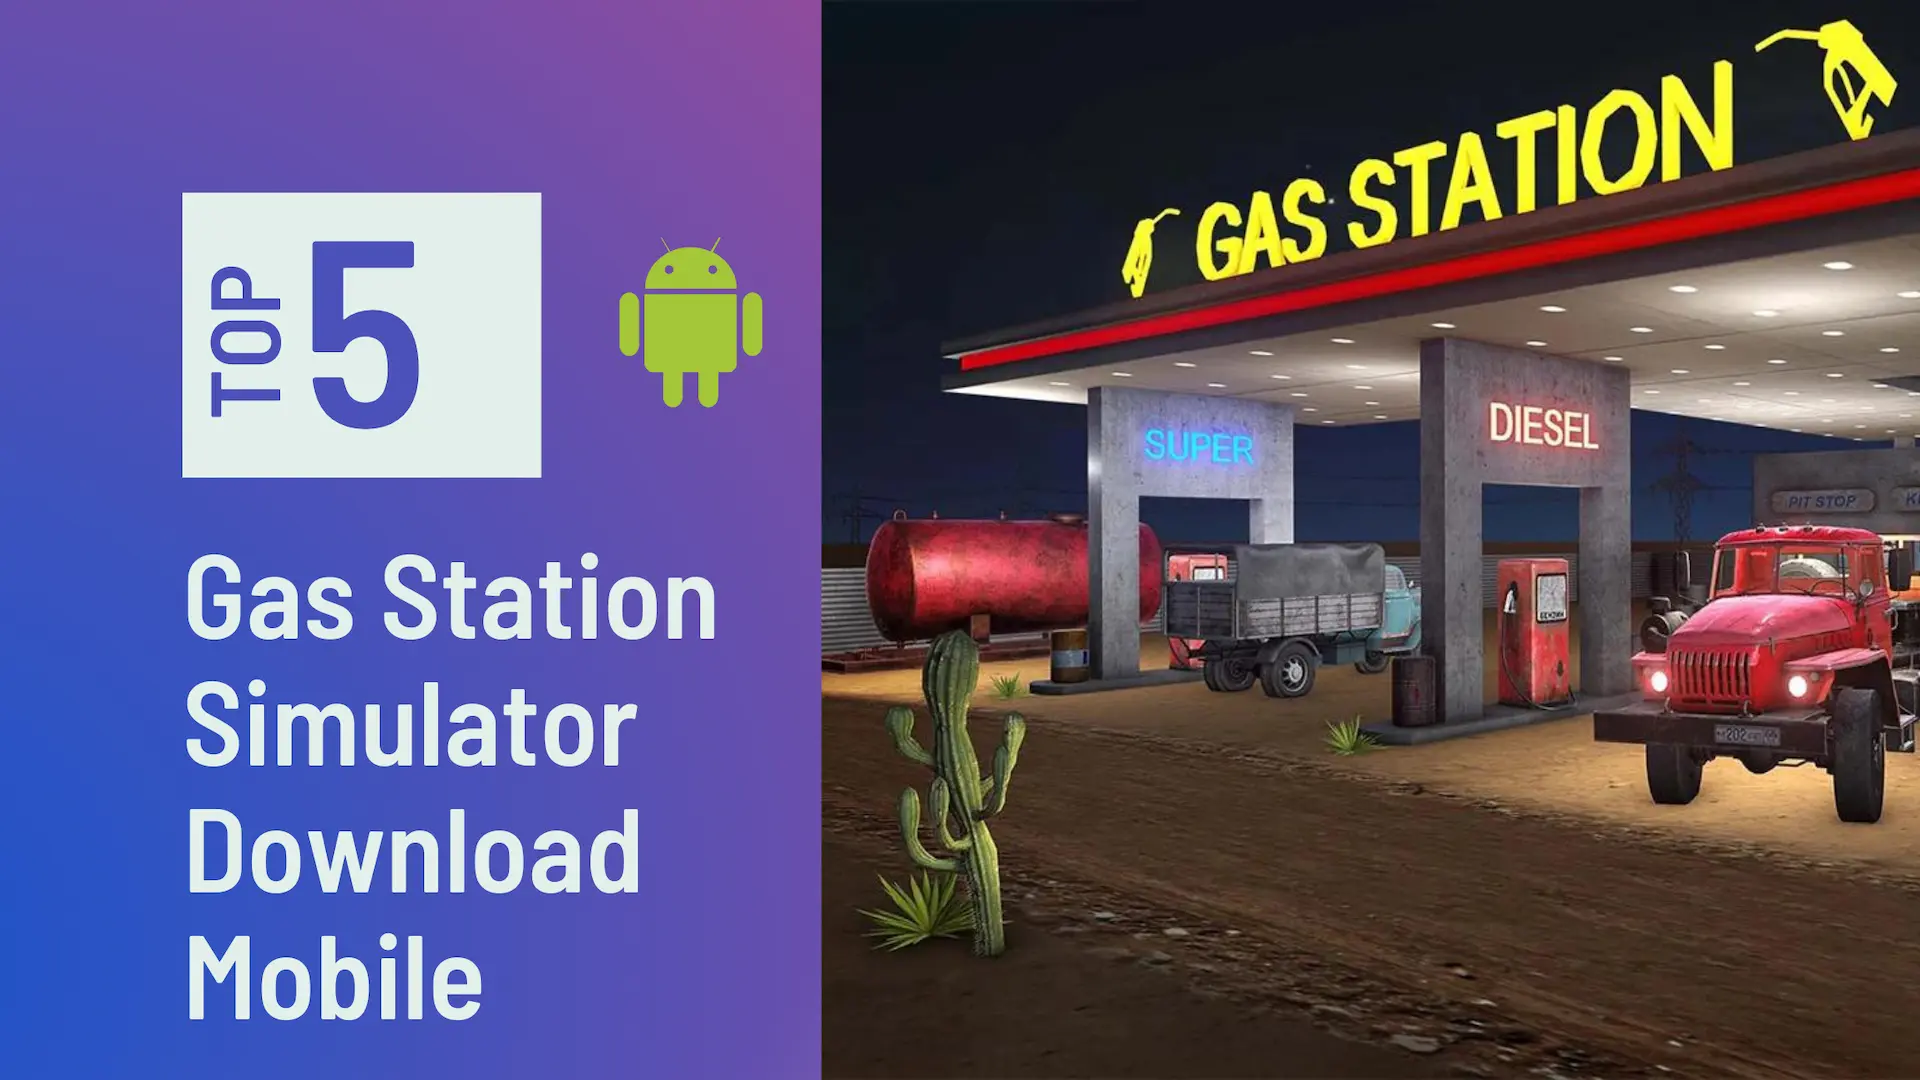 Gas Station Simulator Mobile Top 5 Gas Station Simulator Games For Mobile Android